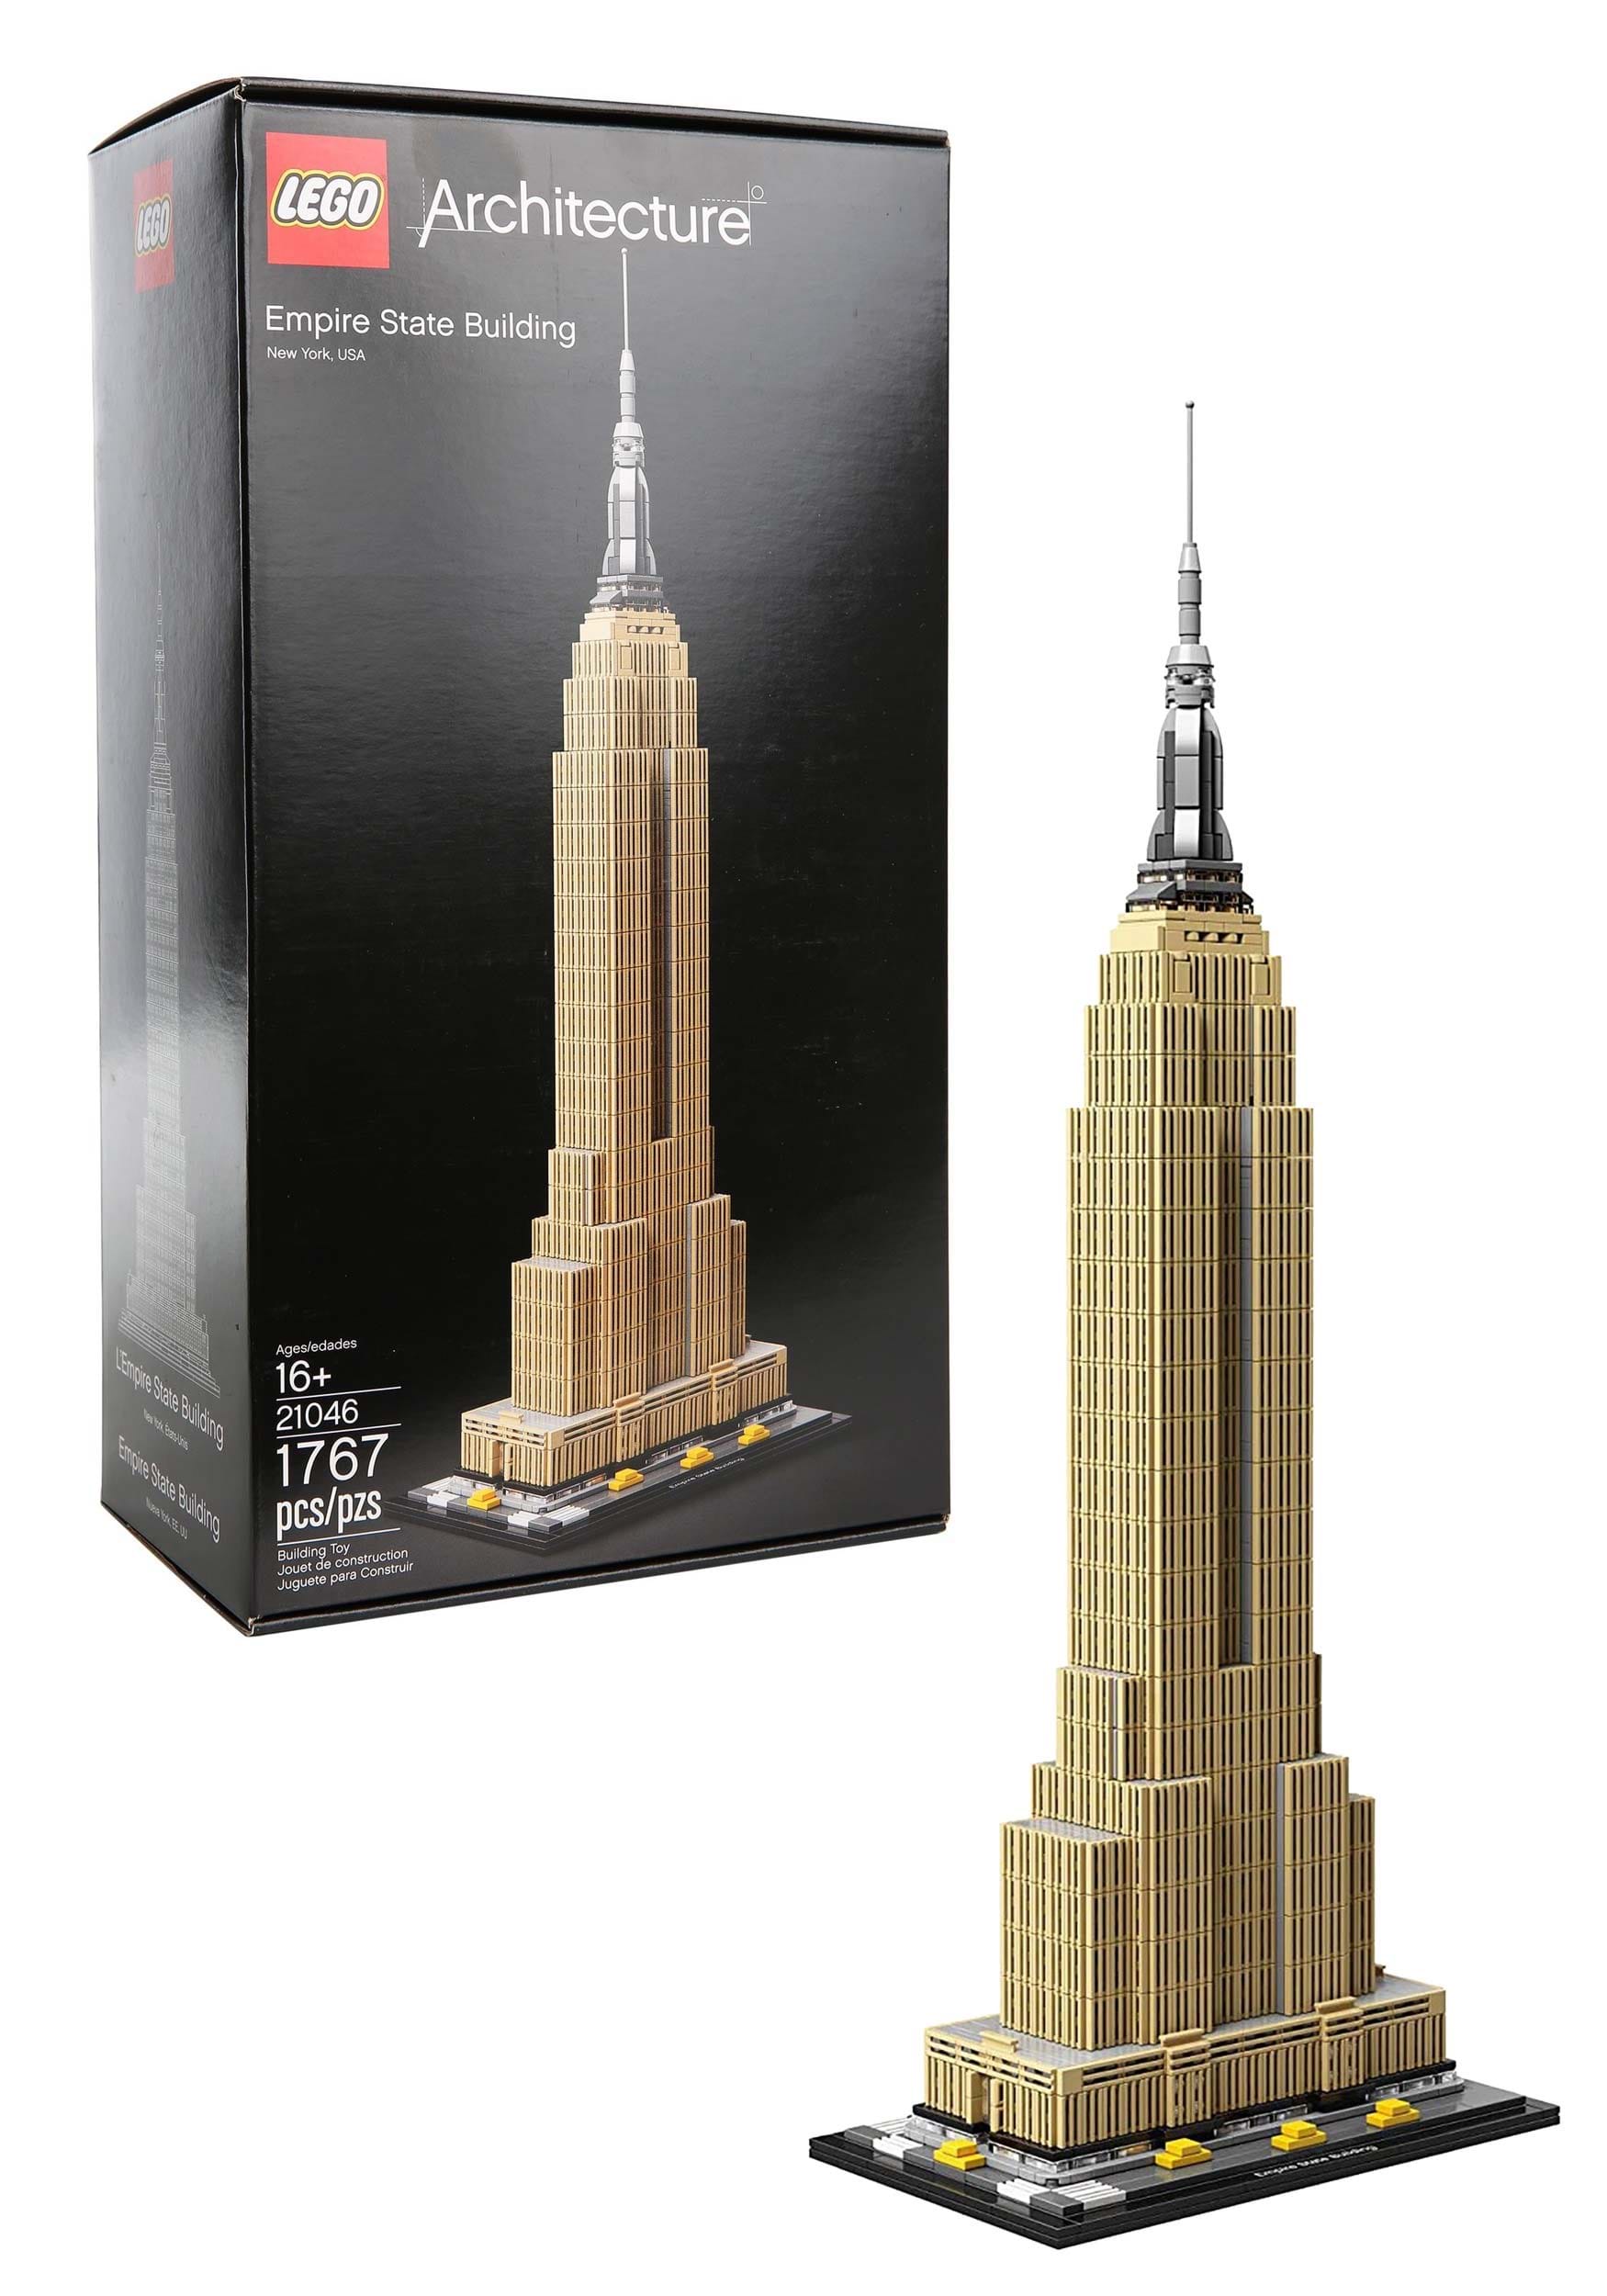 Architecture Empire State Building by LEGO